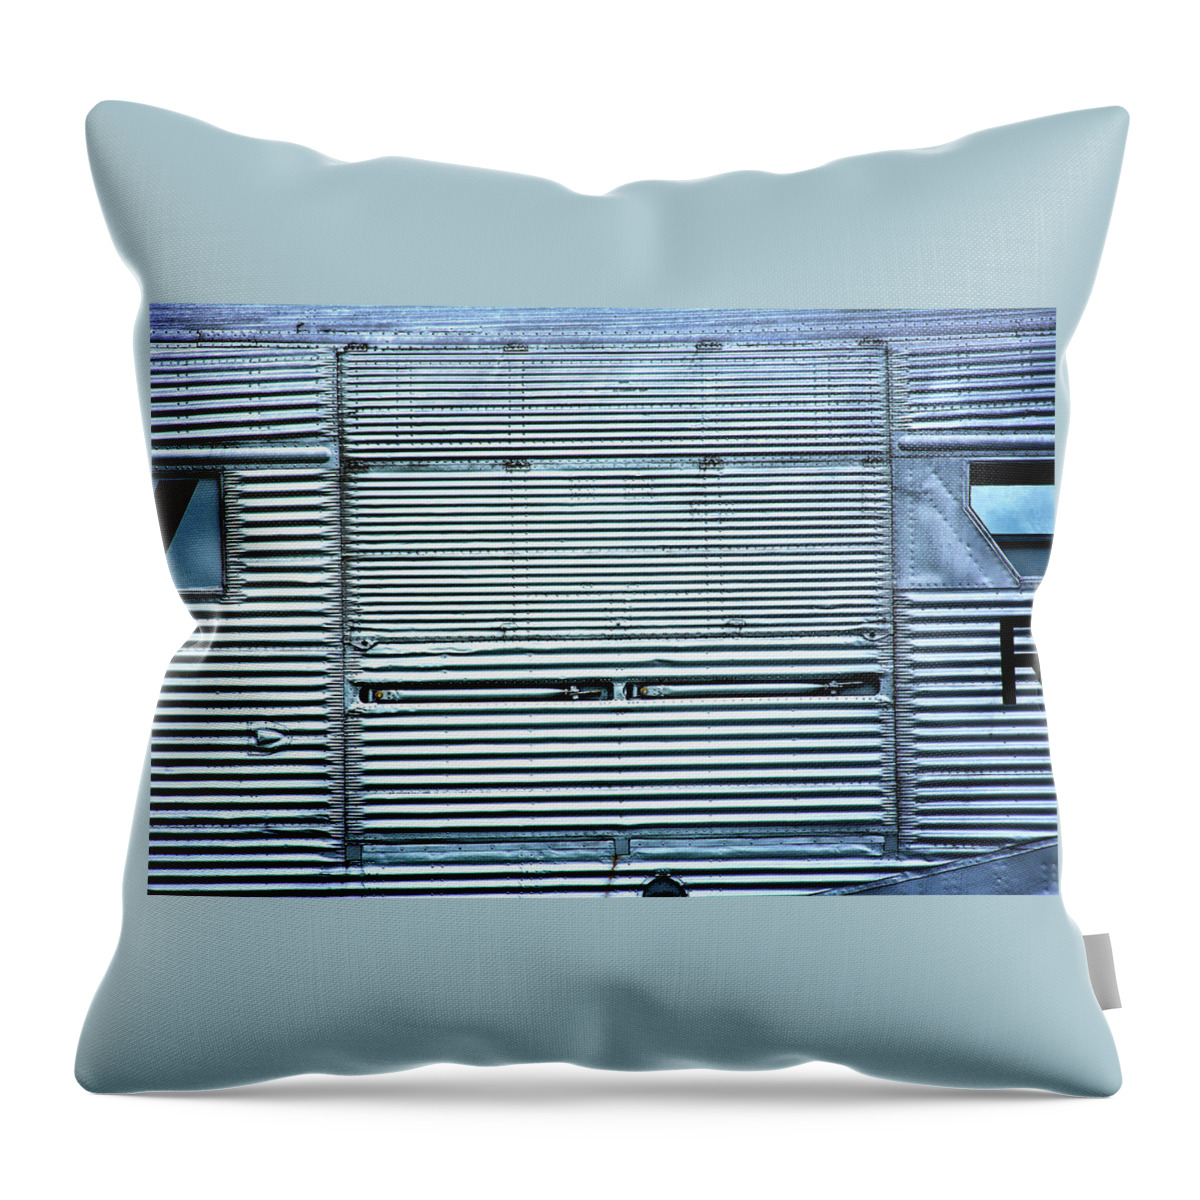 Corrugated Iron Throw Pillow featuring the photograph Case made of corrugated iron by Bernhard Schaffer